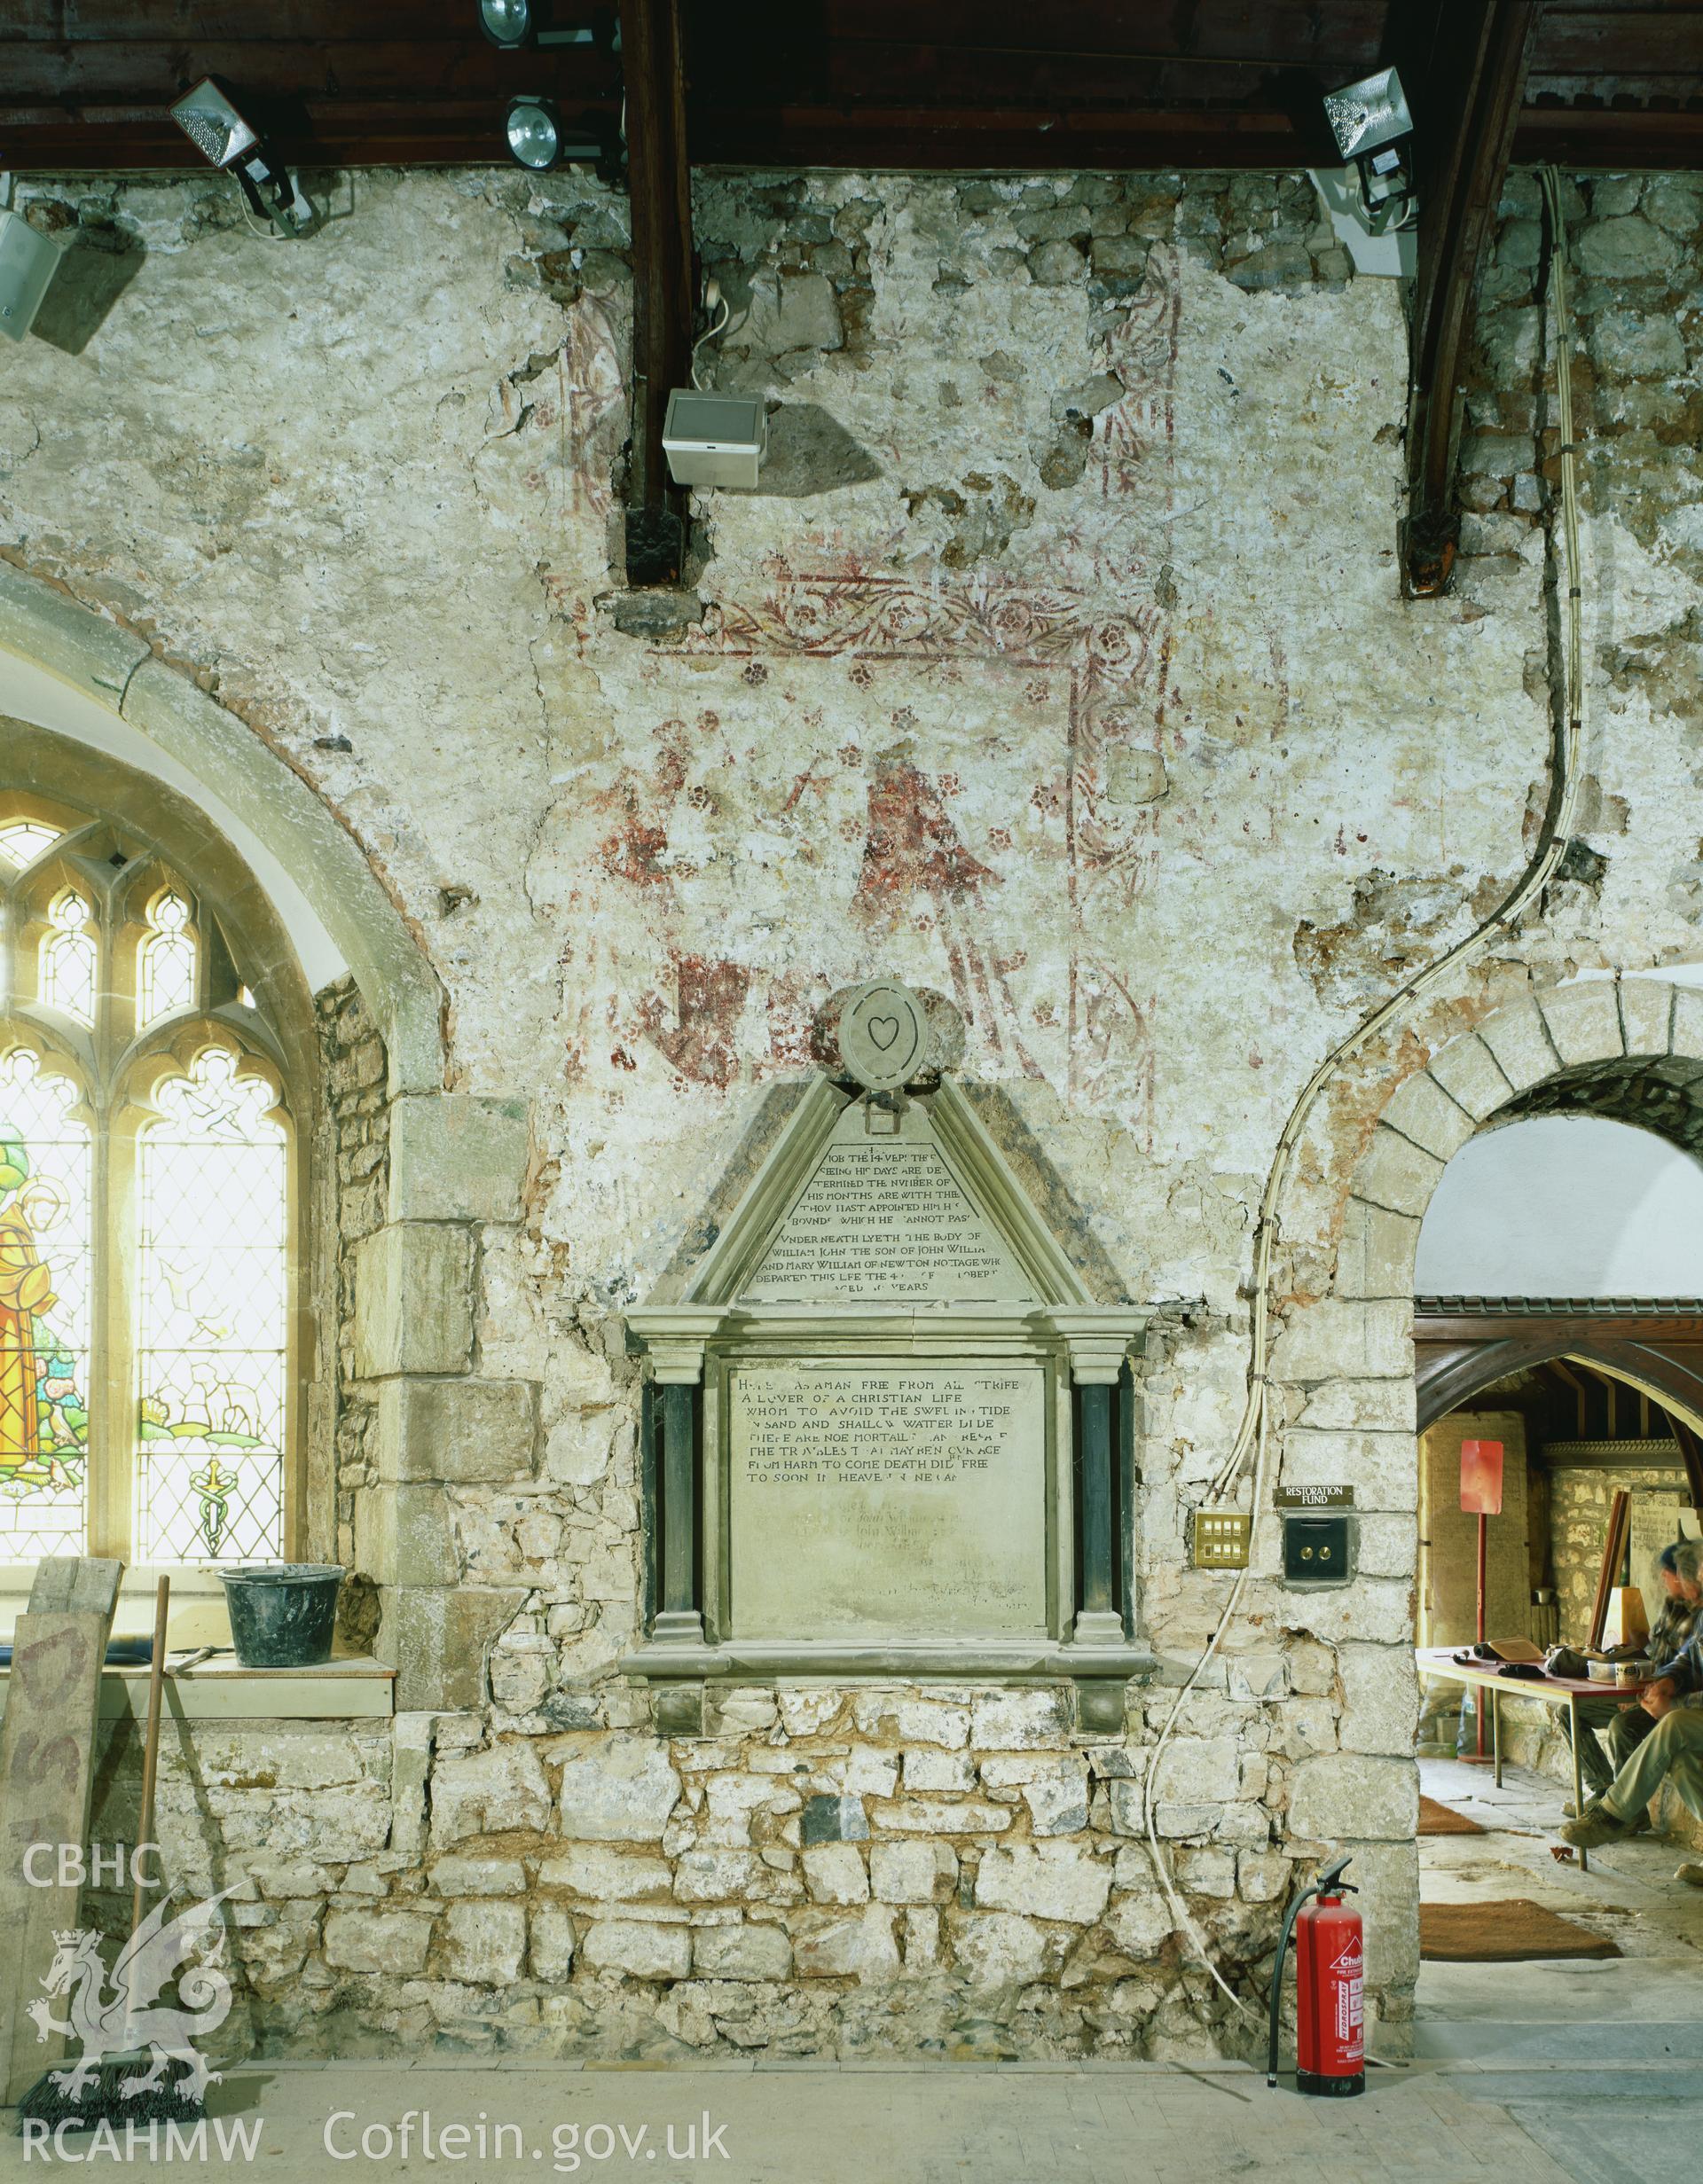 RCAHMW colour transparency showing wallpainting in St John the Baptist Church, Newton Nottage